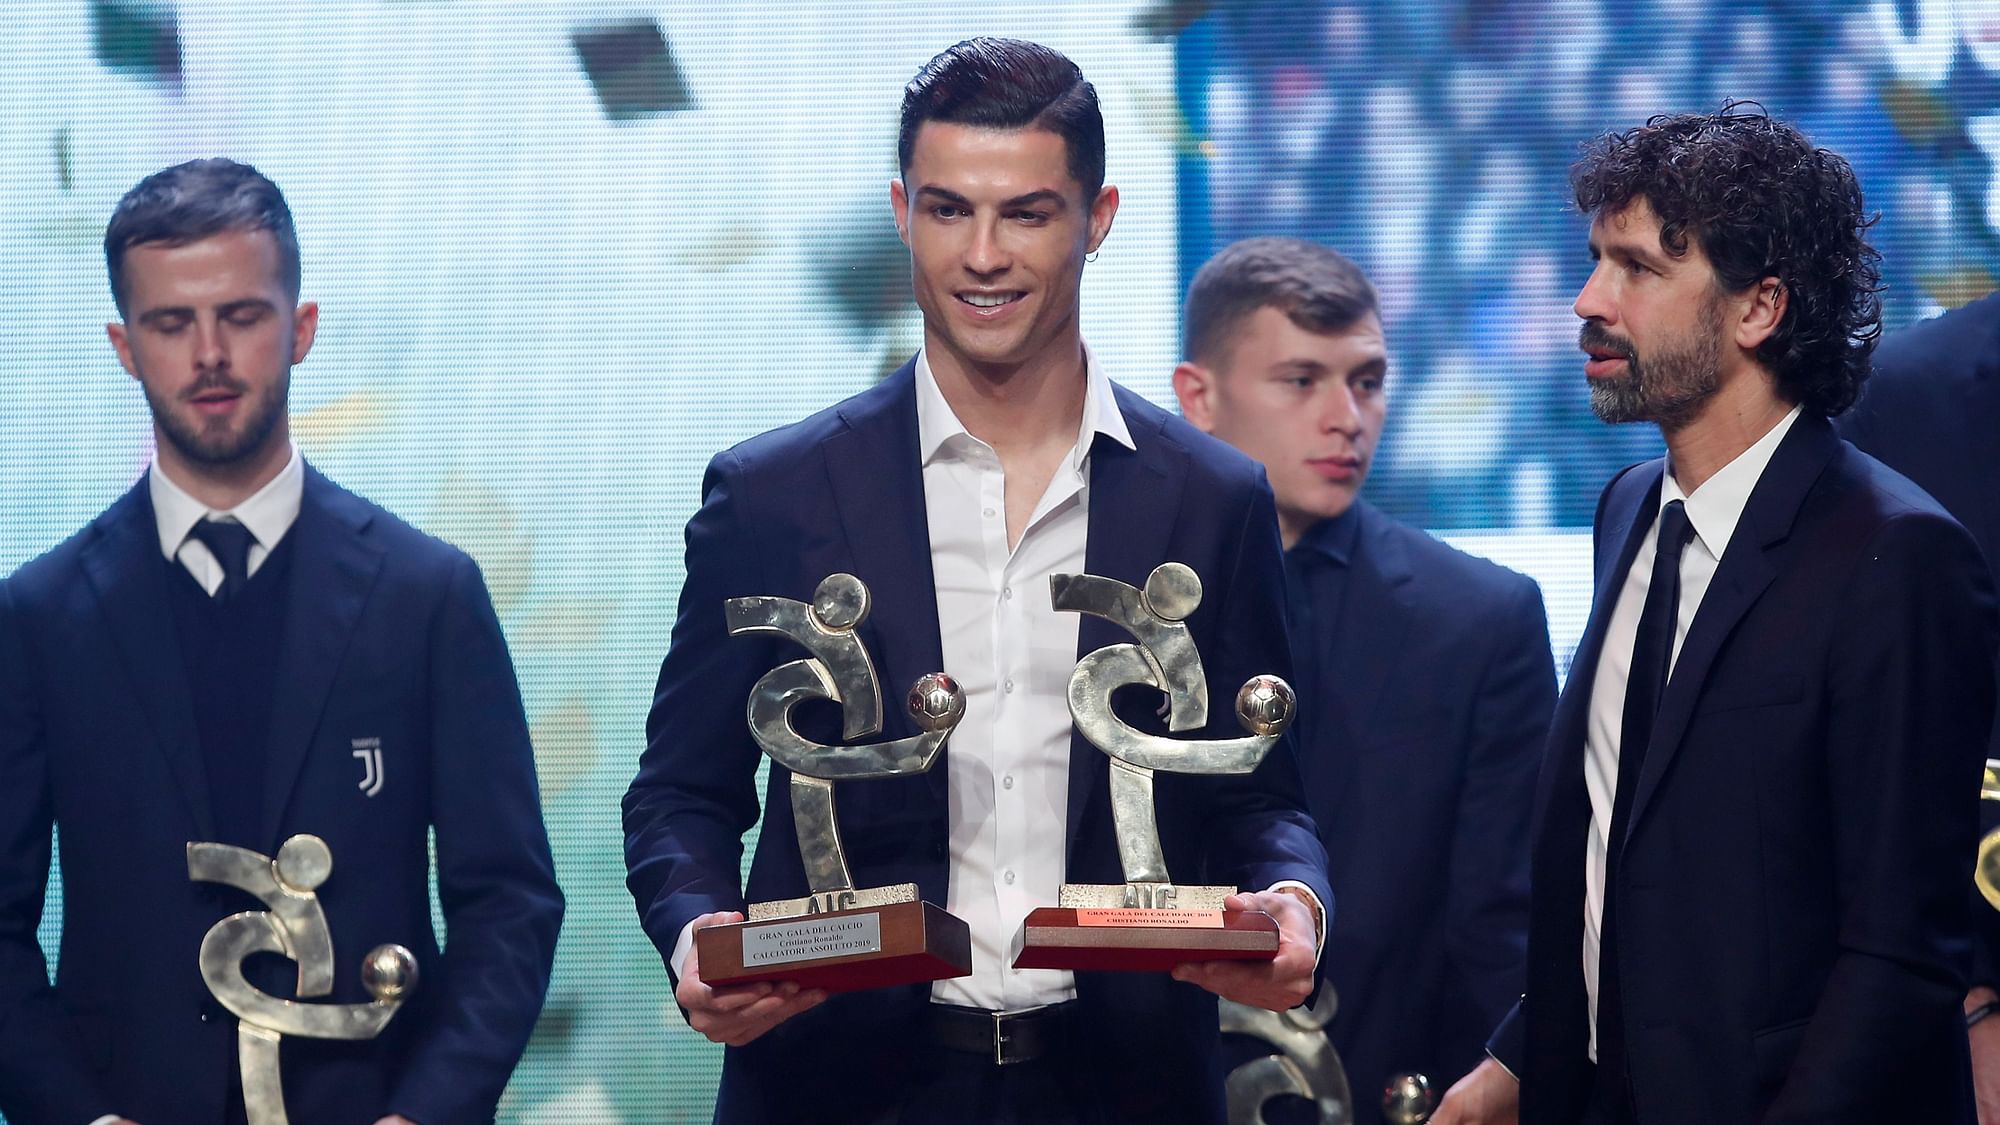 Cristiano Ronaldo was named the Italian league’s player of the year on Monday.